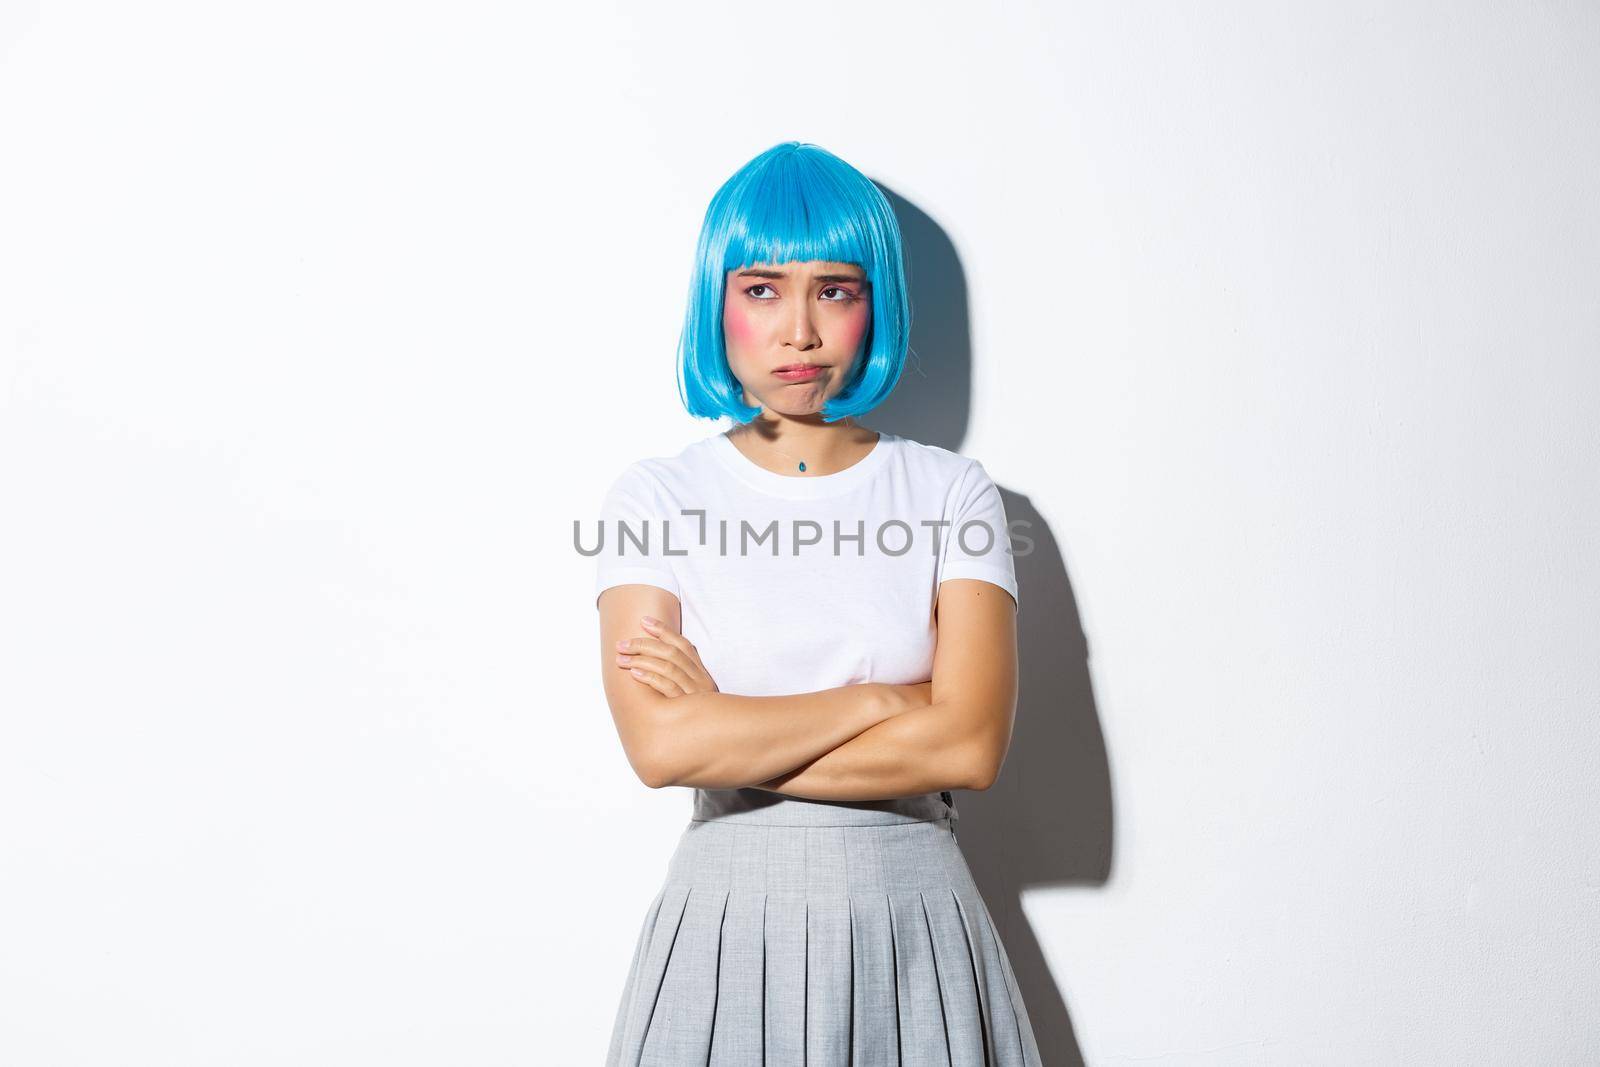 Portrait of cute asian girl looking troubled or upset, cross arms on chest and looking aside, standing in blue wig and school uniform, dressed for halloween celebration.